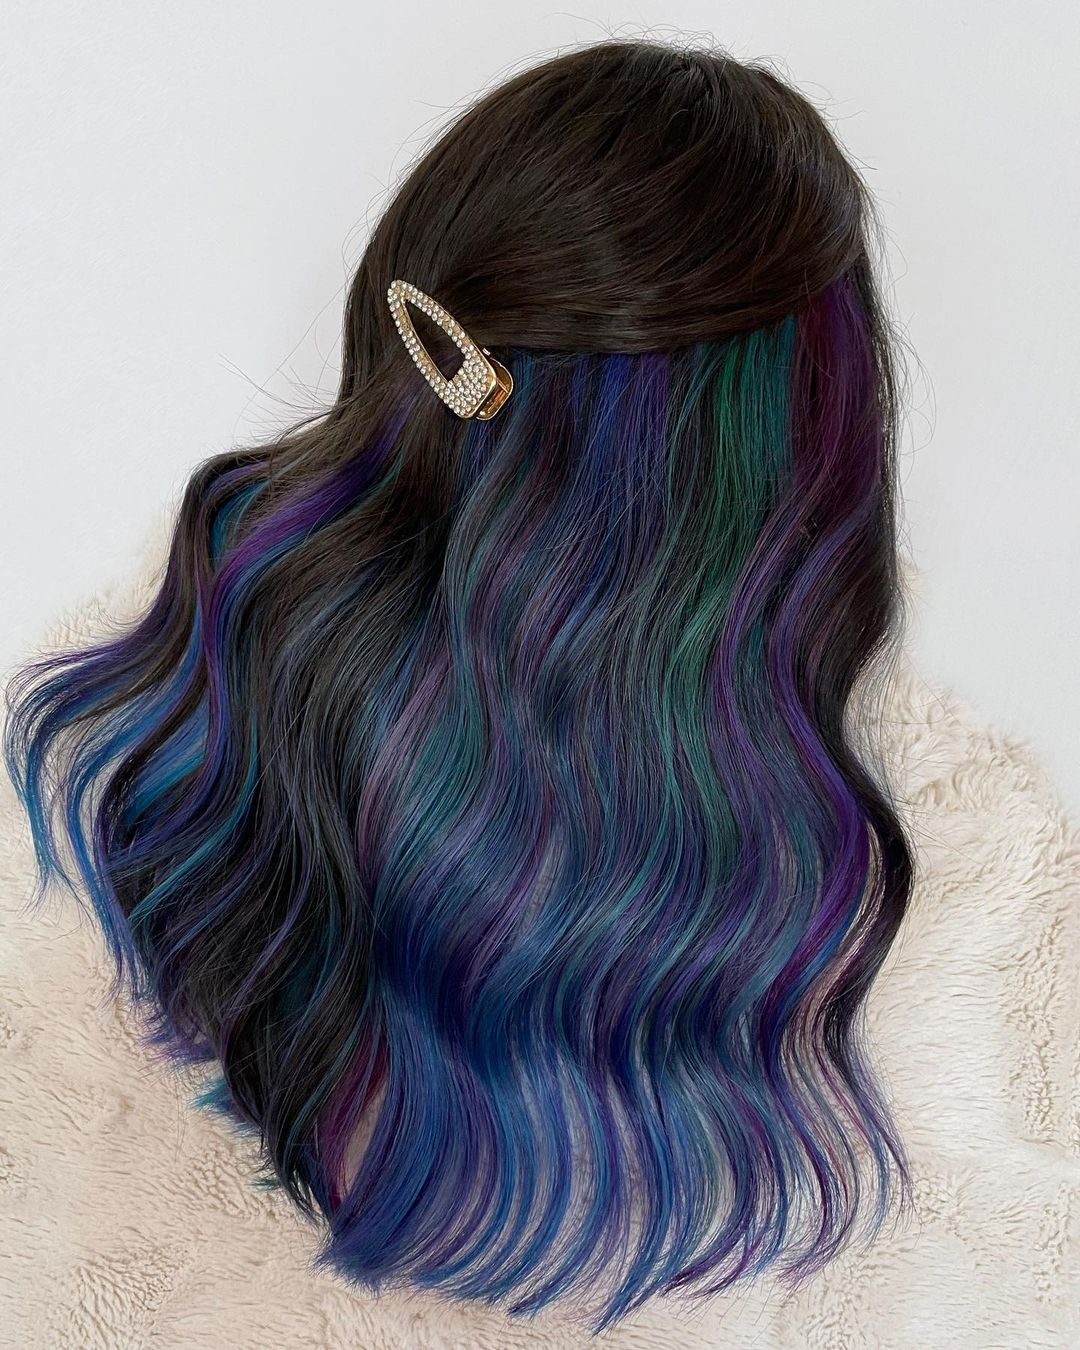 These Mermaid Hair Colors Are a Work of Art